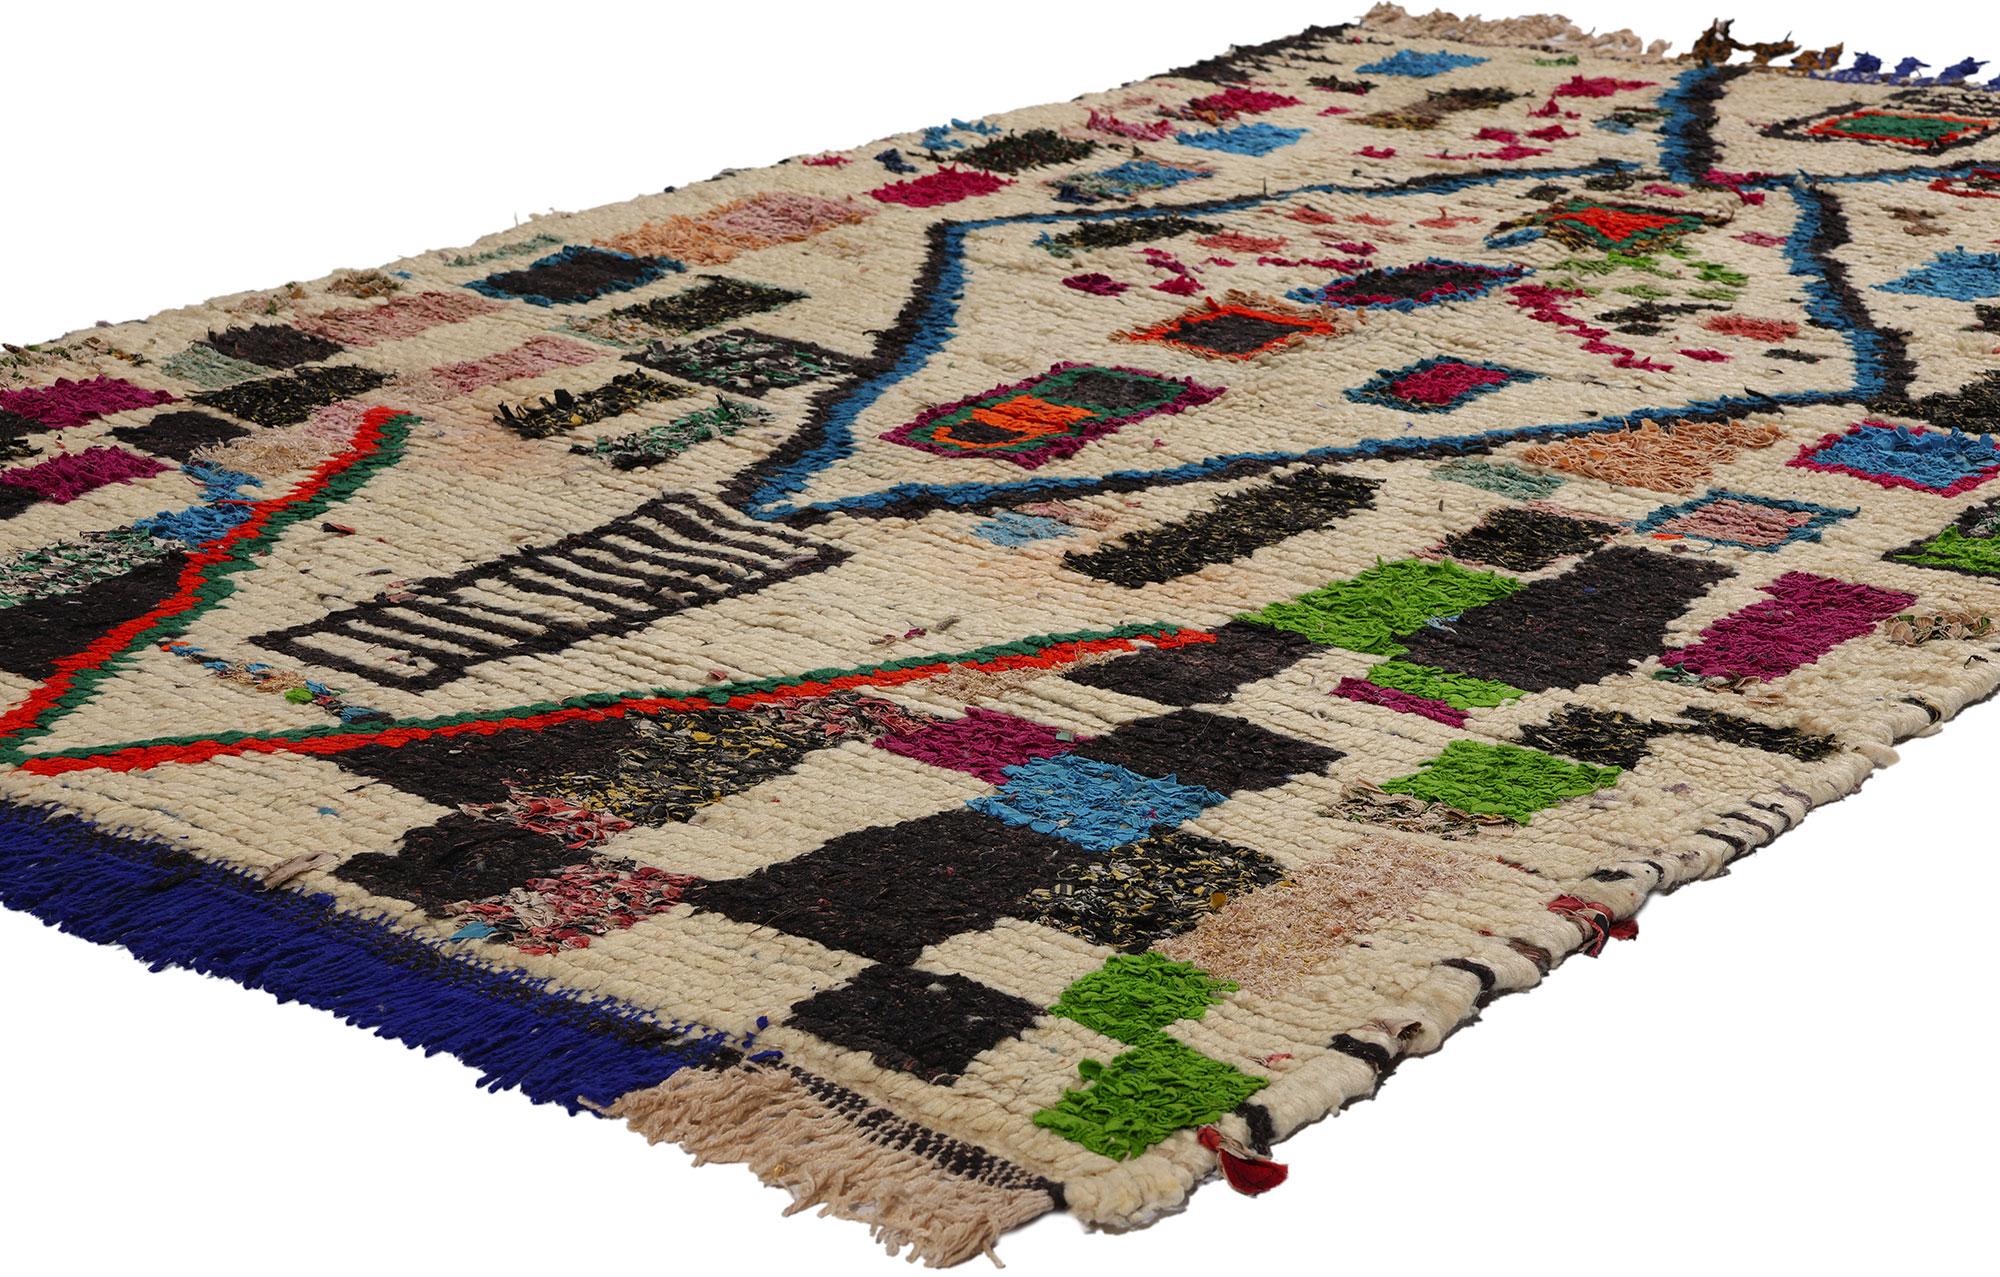 21836 Vintage Boucherouite Moroccan Azilal Rag Rug, 04'00 x 07'00. Azilal rag rugs, also recognized as Azilal Boucherouite rugs, epitomize sustainable craftsmanship originating from the Azilal region in the Atlas Mountains of Morocco. Handcrafted by